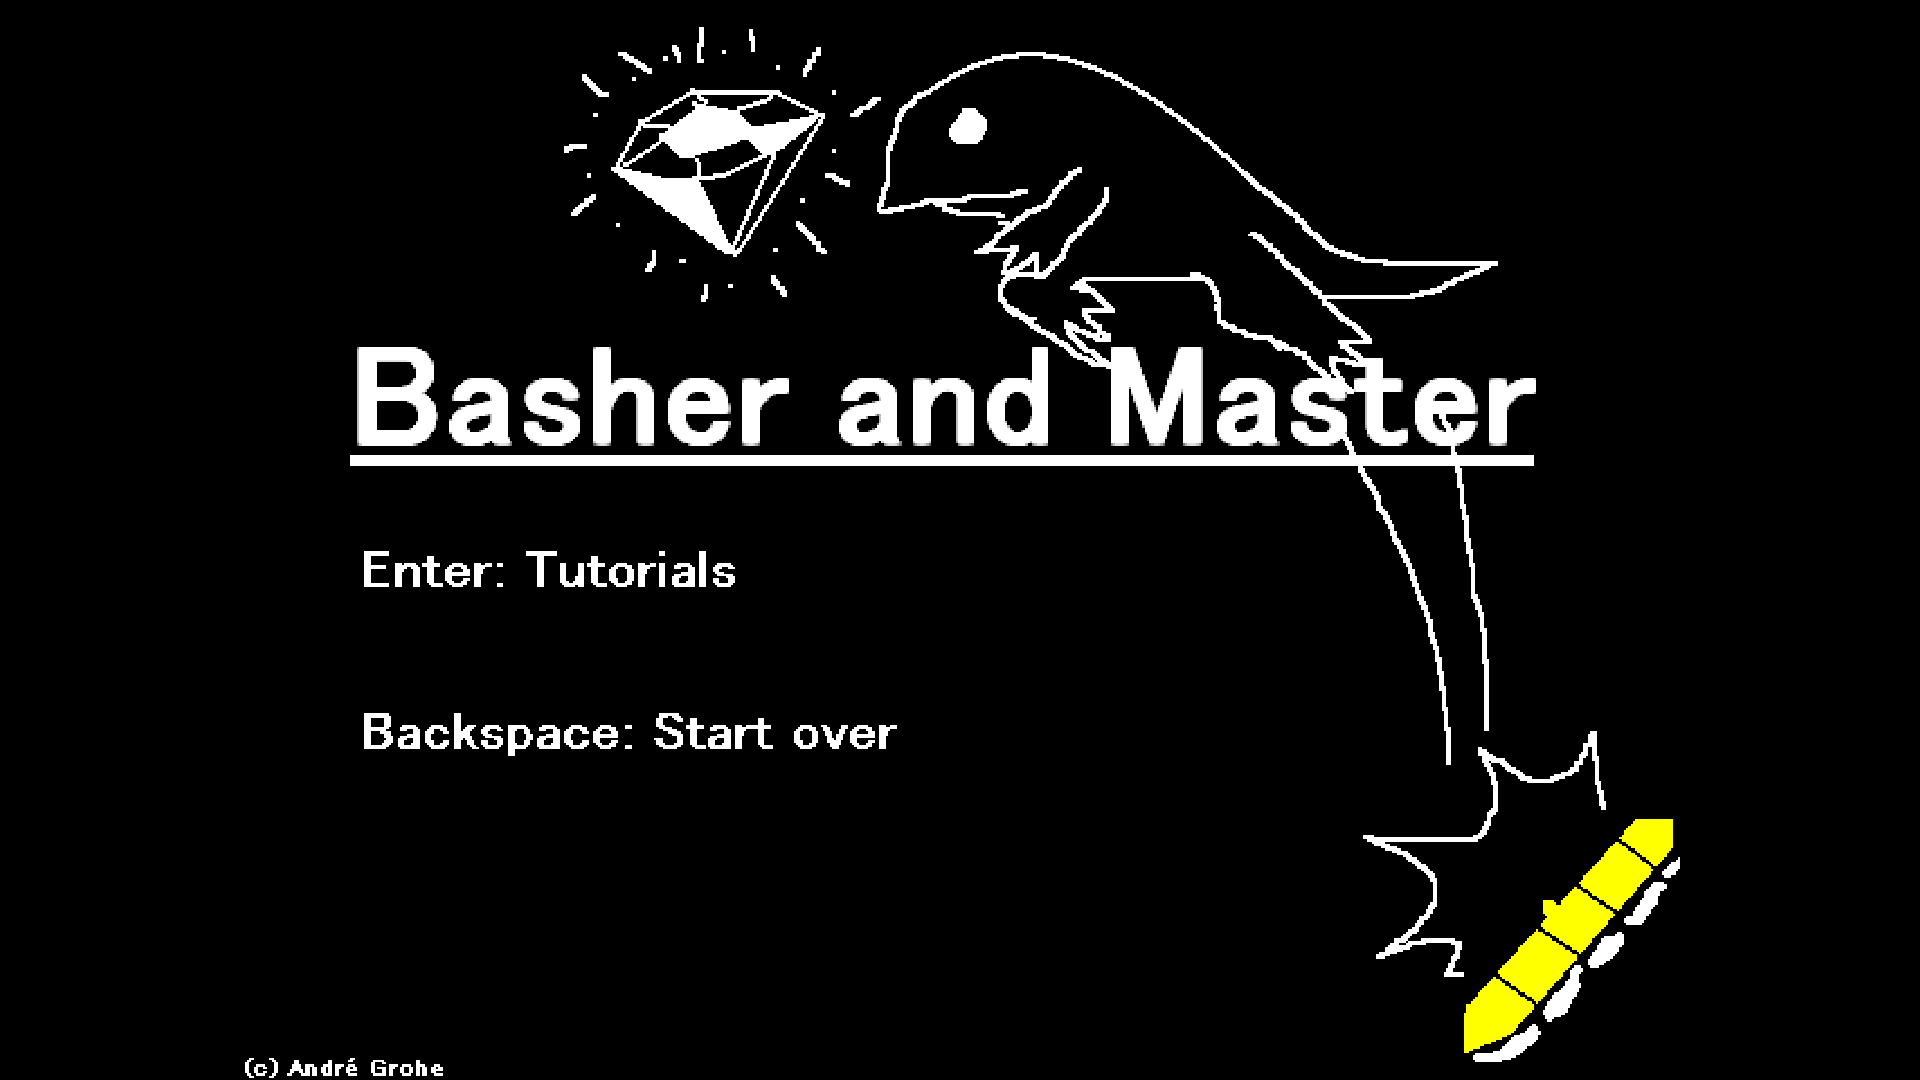 Basher and Master